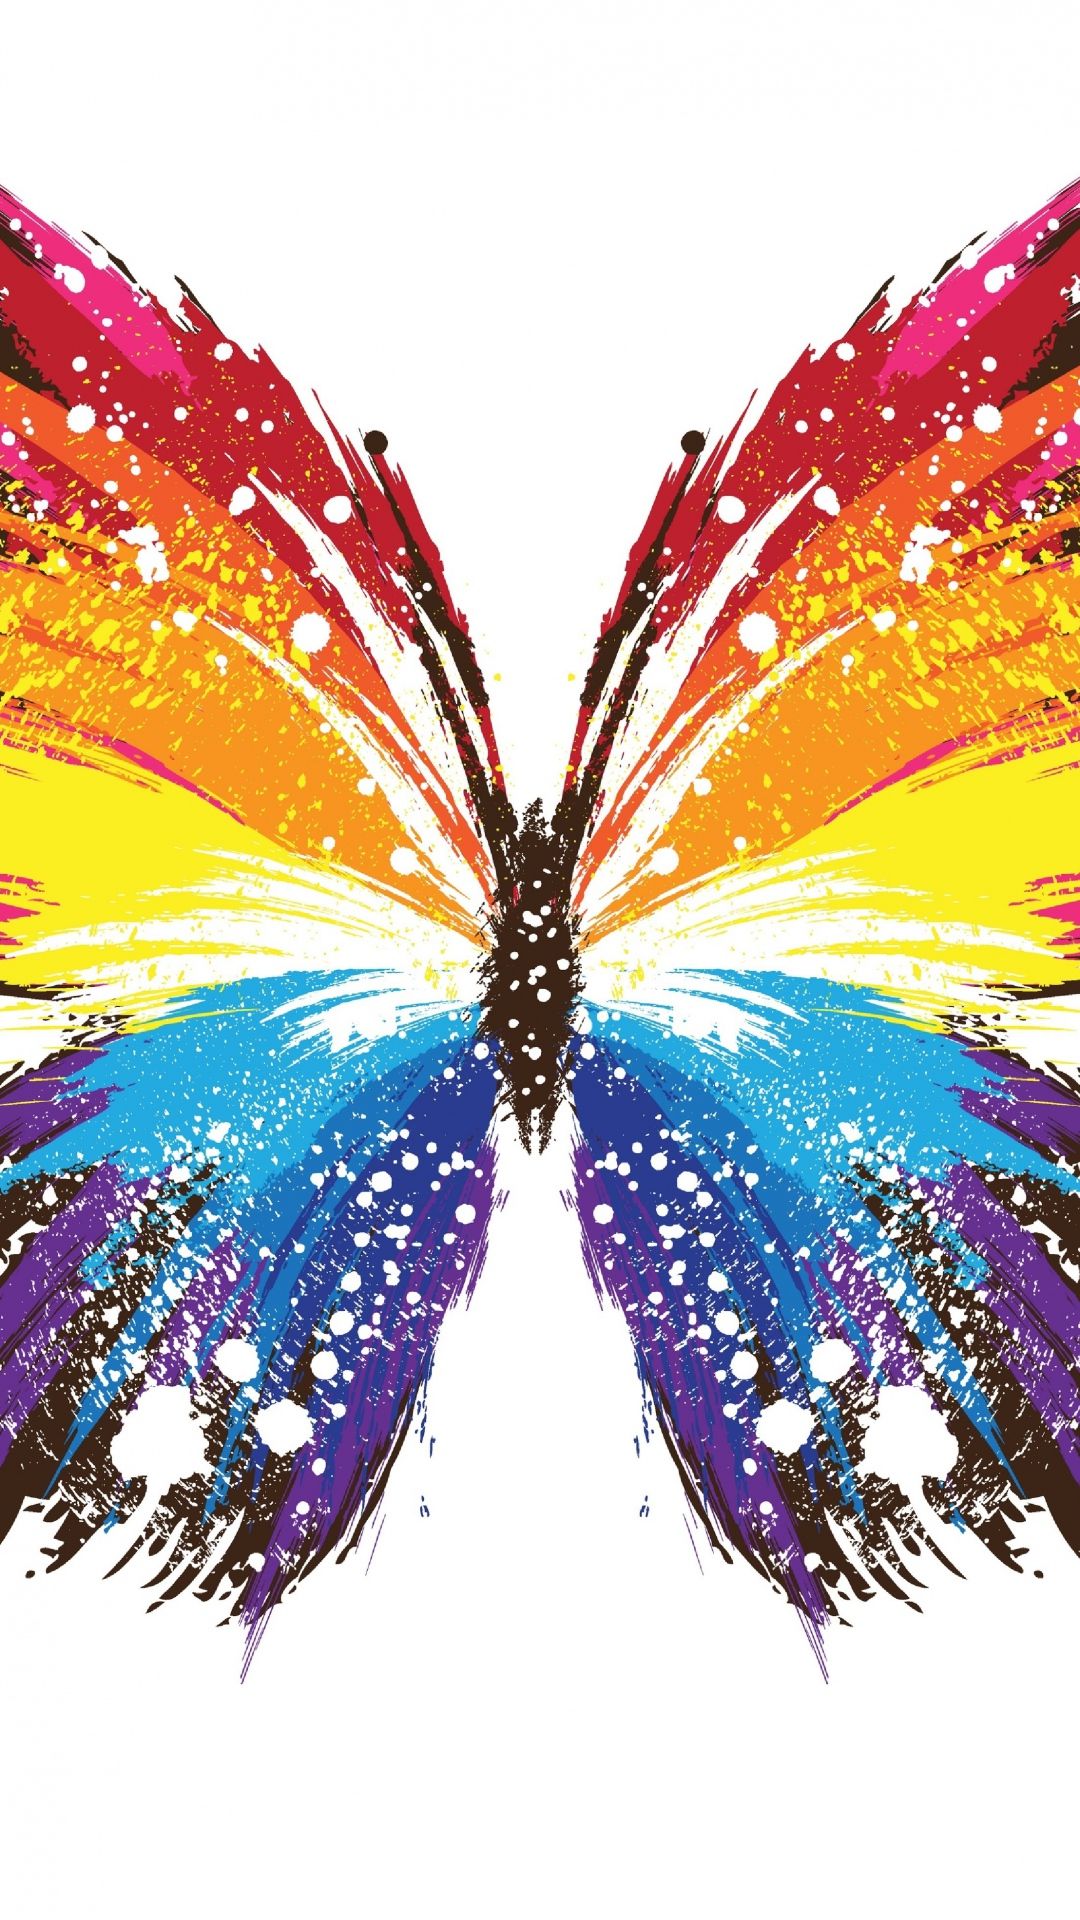 Free Download Butterfly Wallpaper For Mobile